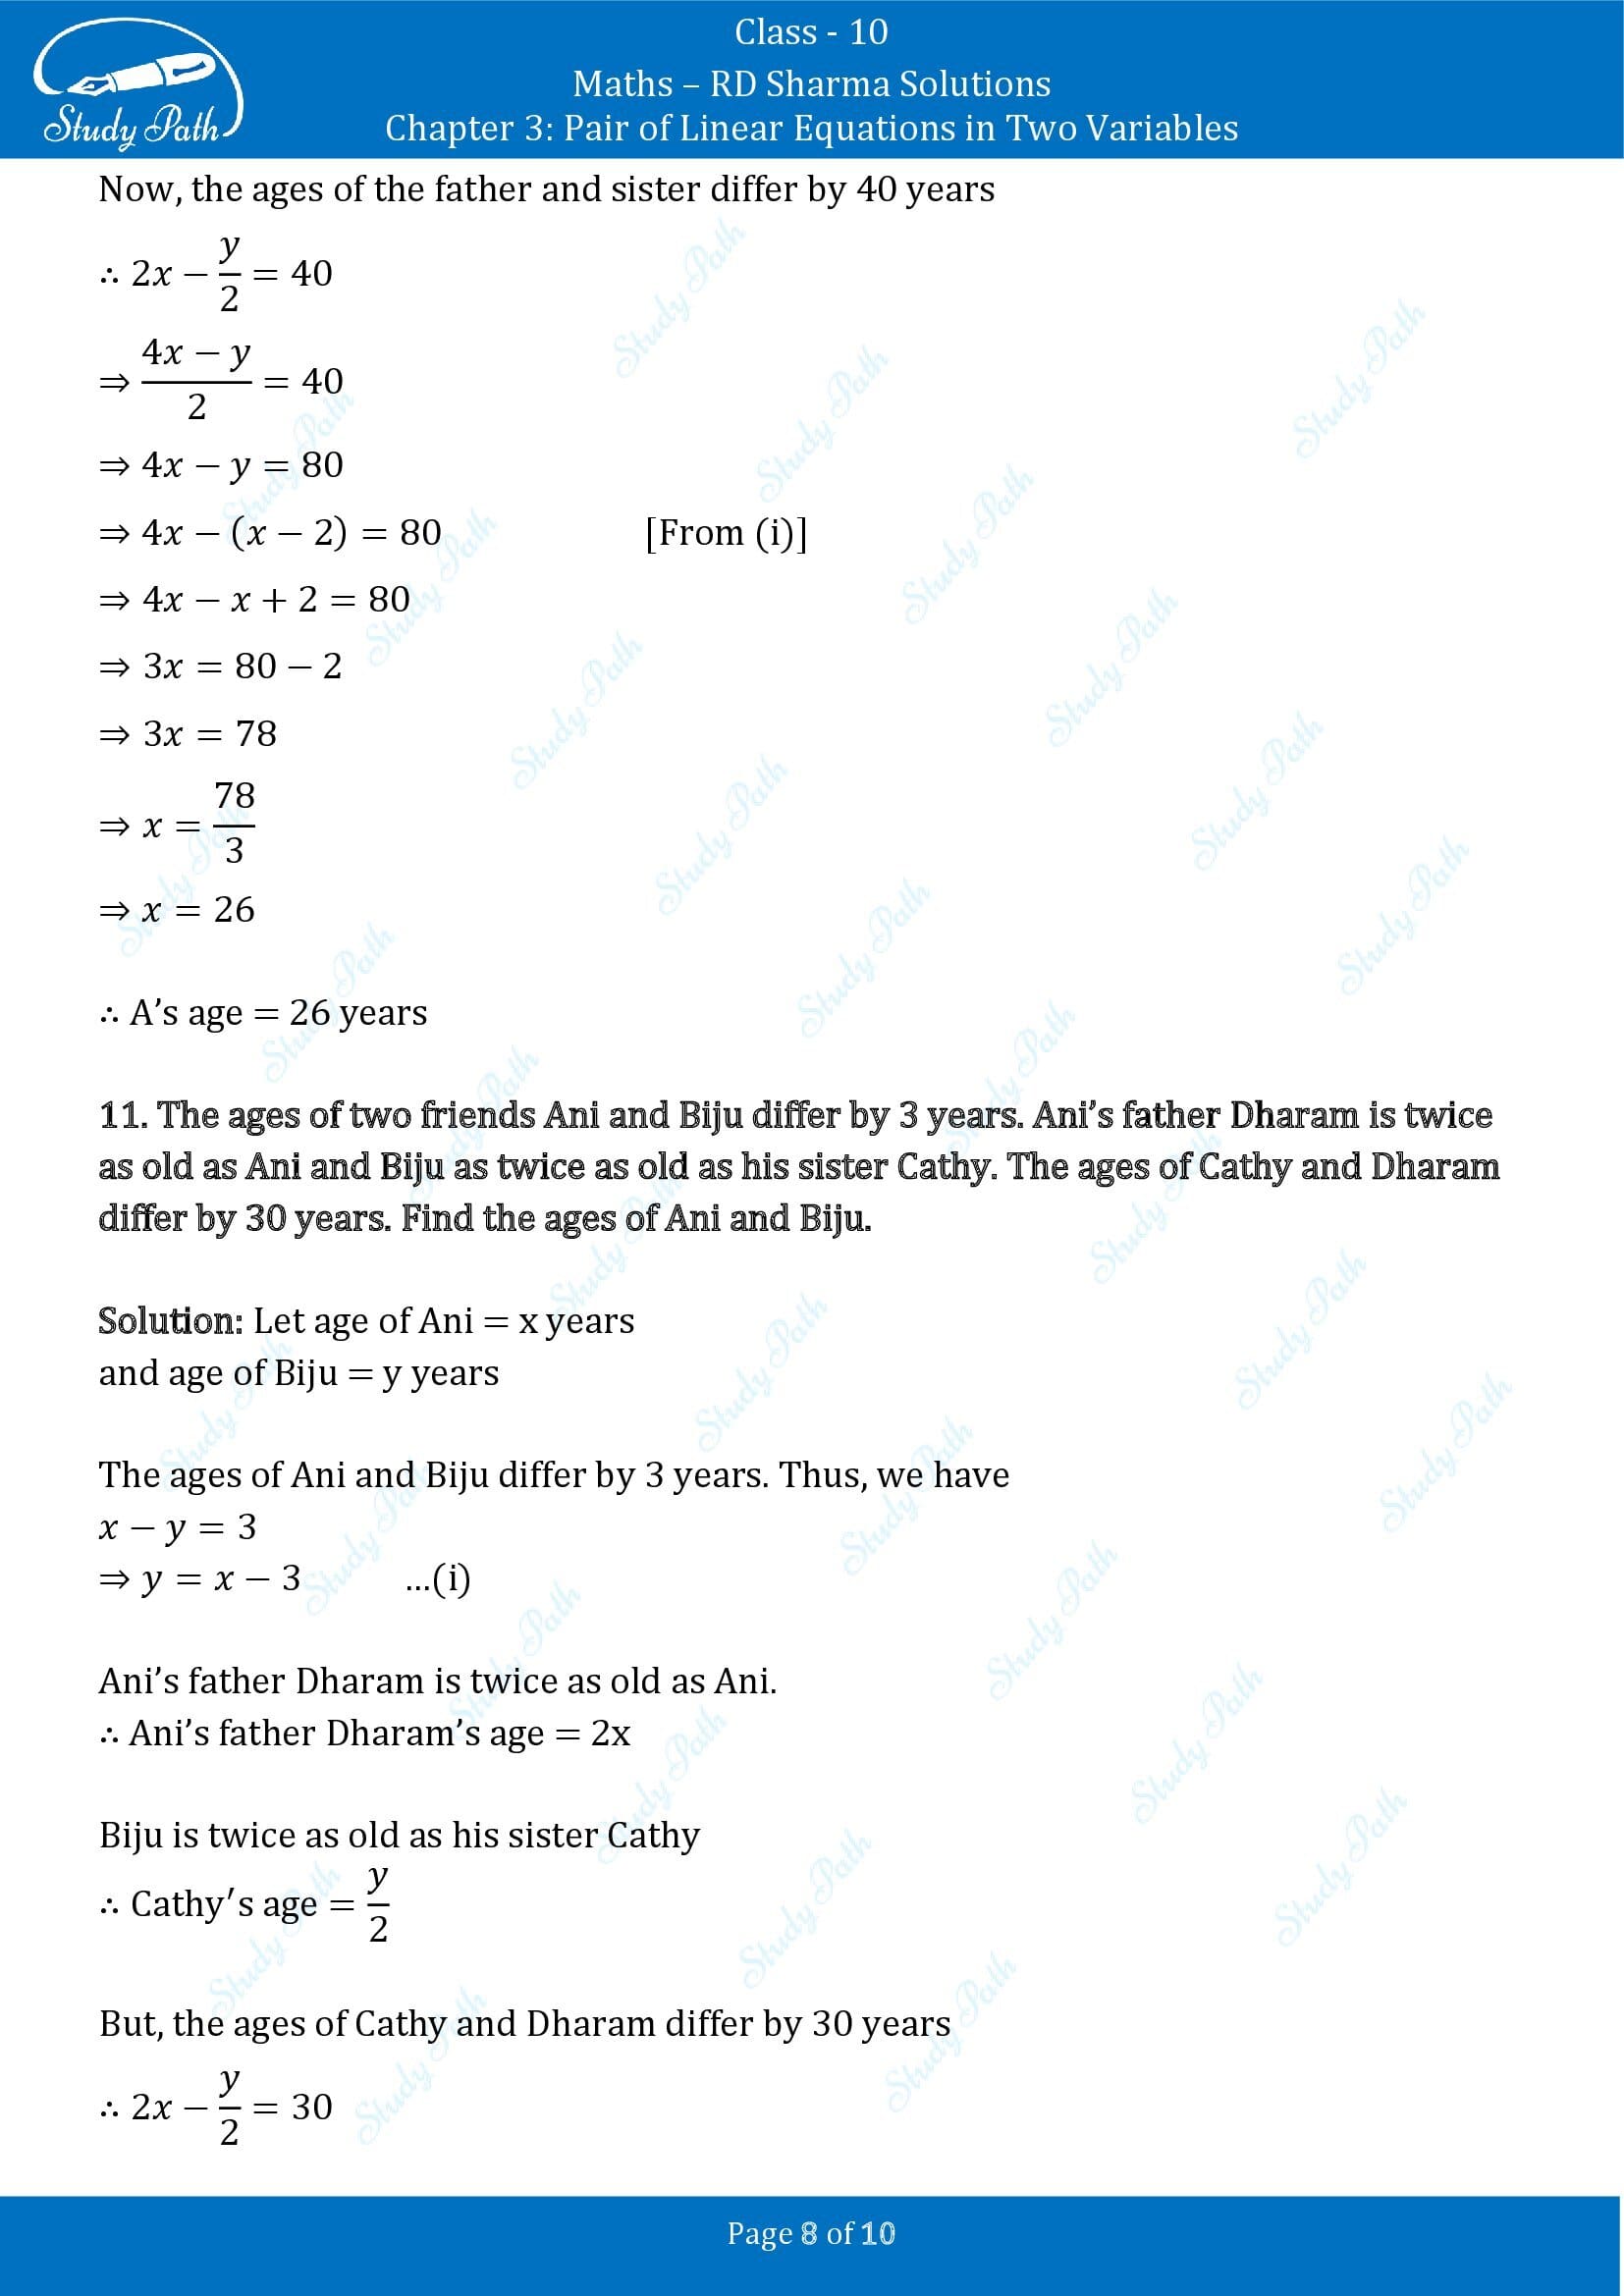 RD Sharma Solutions Class 10 Chapter 3 Pair of Linear Equations in Two Variables Exercise 3.9 00008